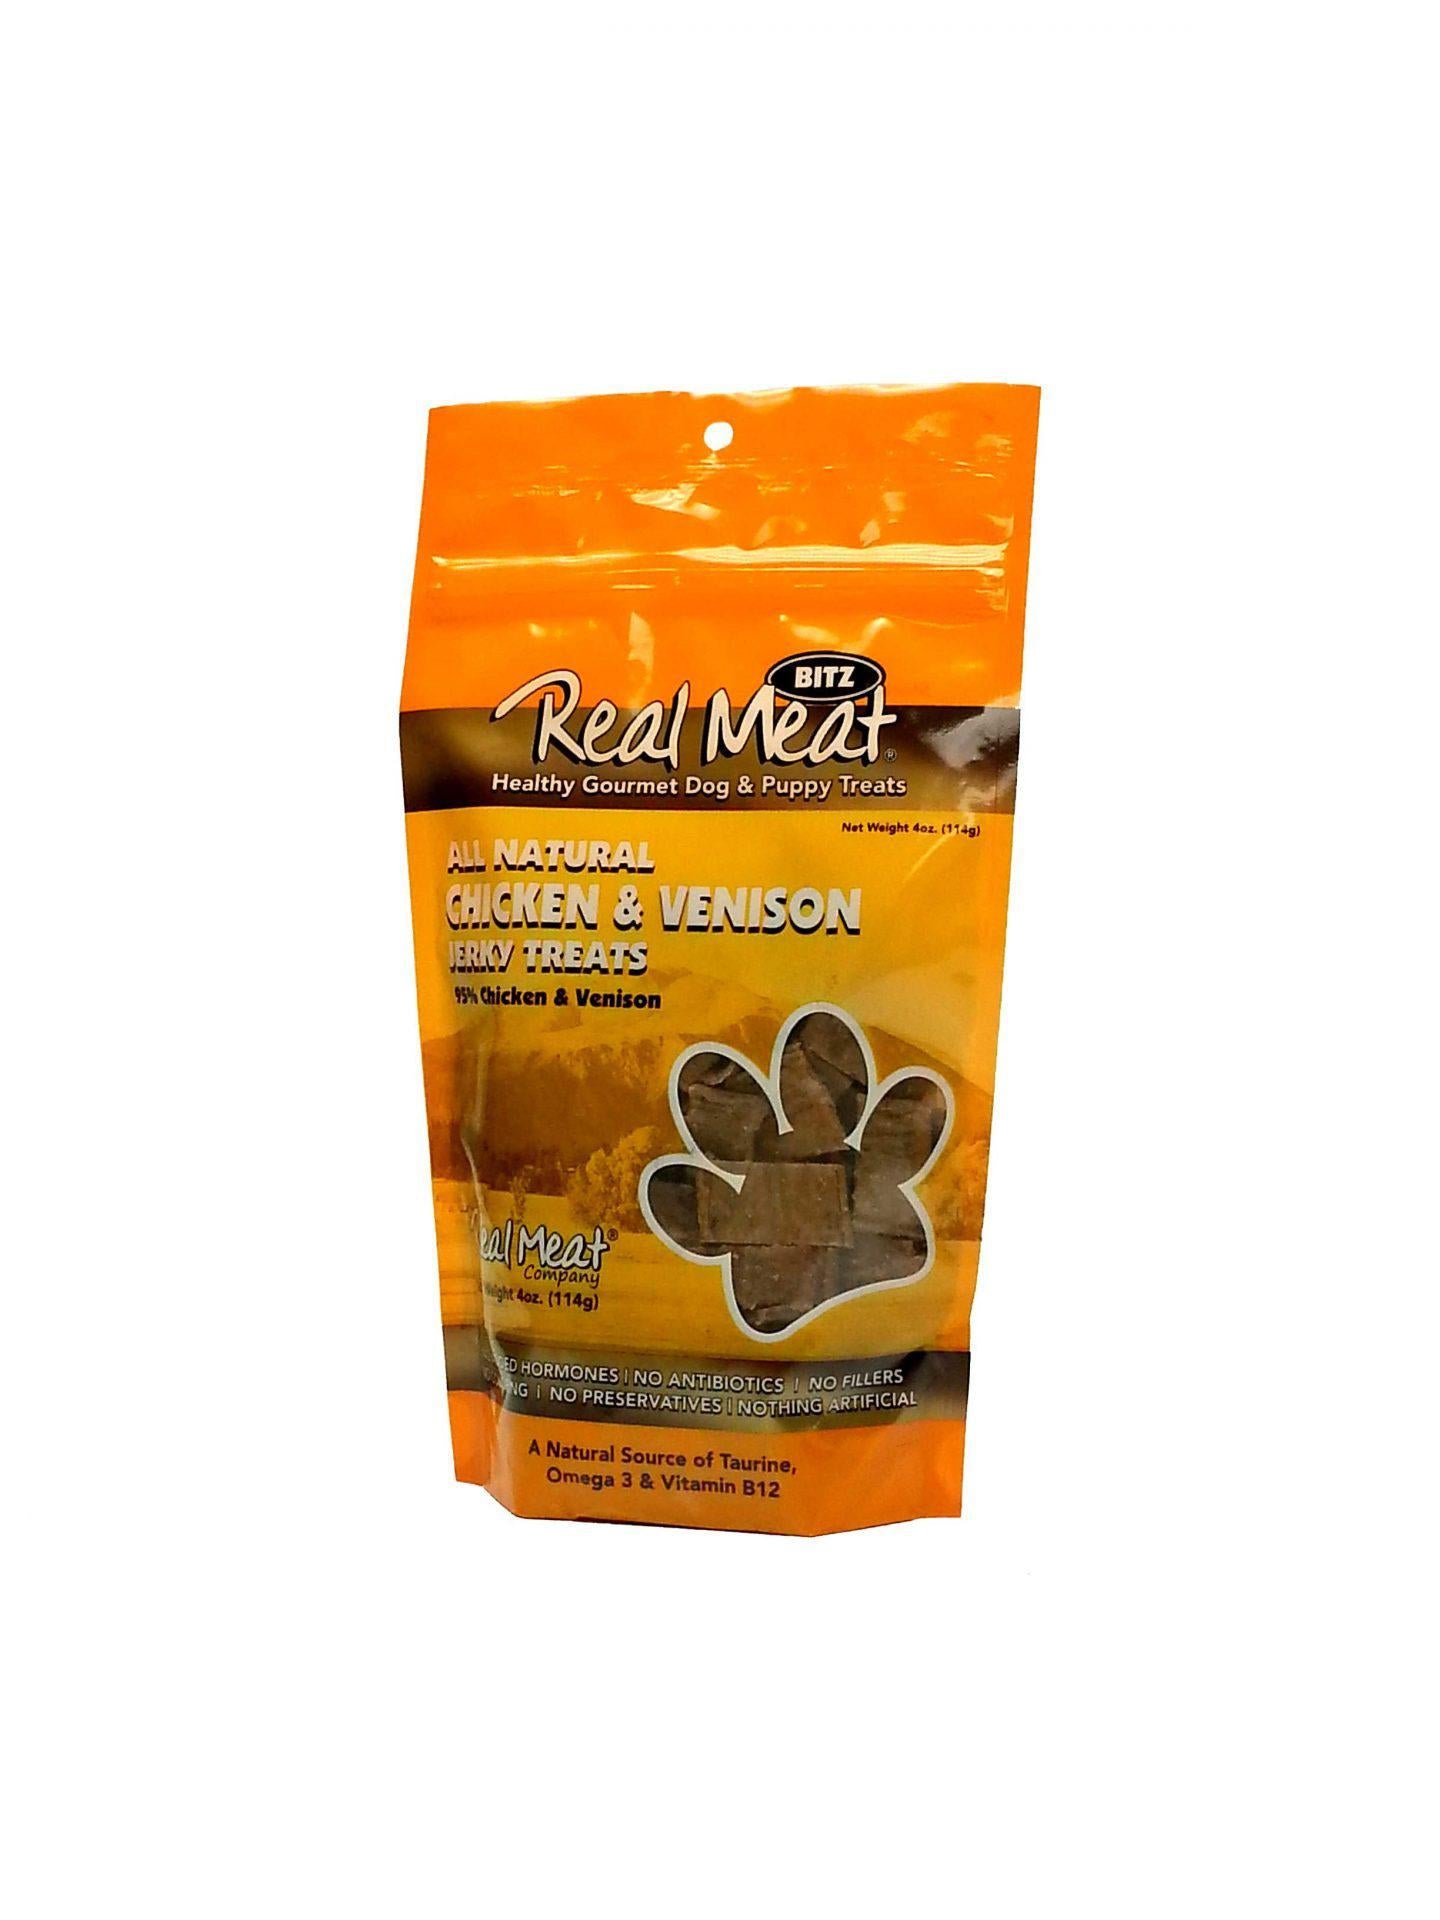 The Real Meat Company Chicken & Venison Jerky Grain-Free Dog Treats-Le Pup Pet Supplies and Grooming